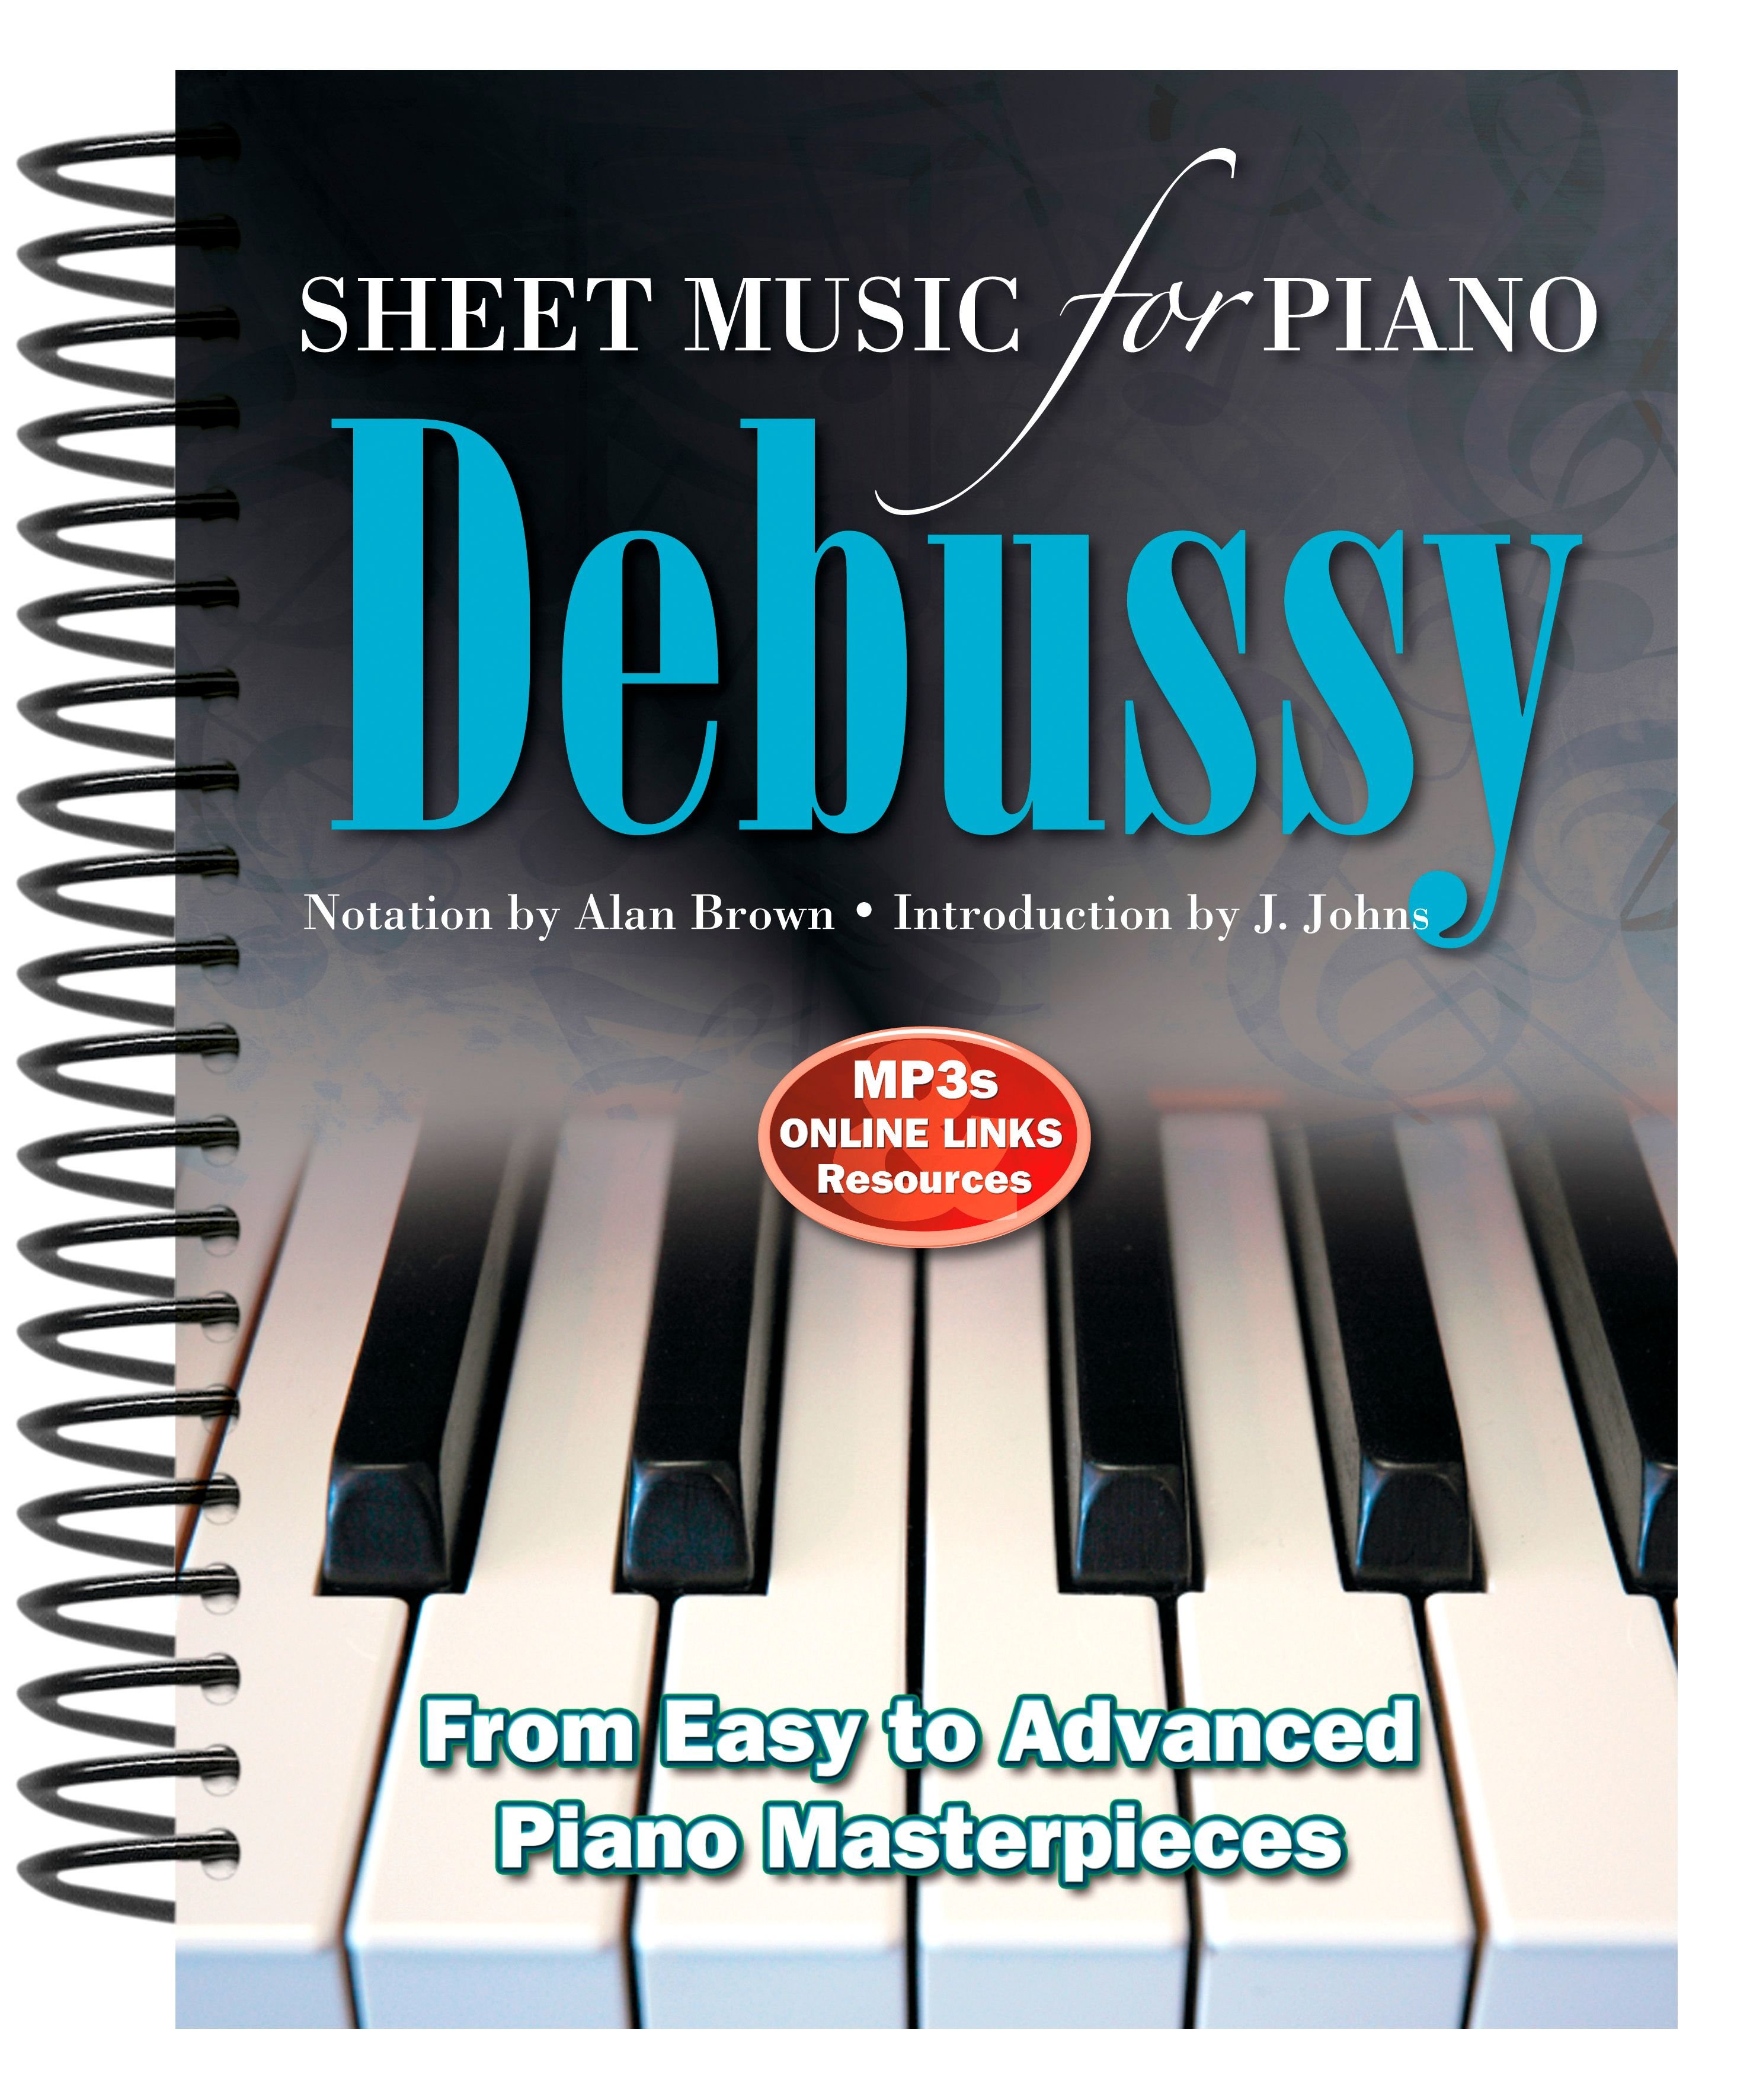 Debussy: Sheet Music for Piano